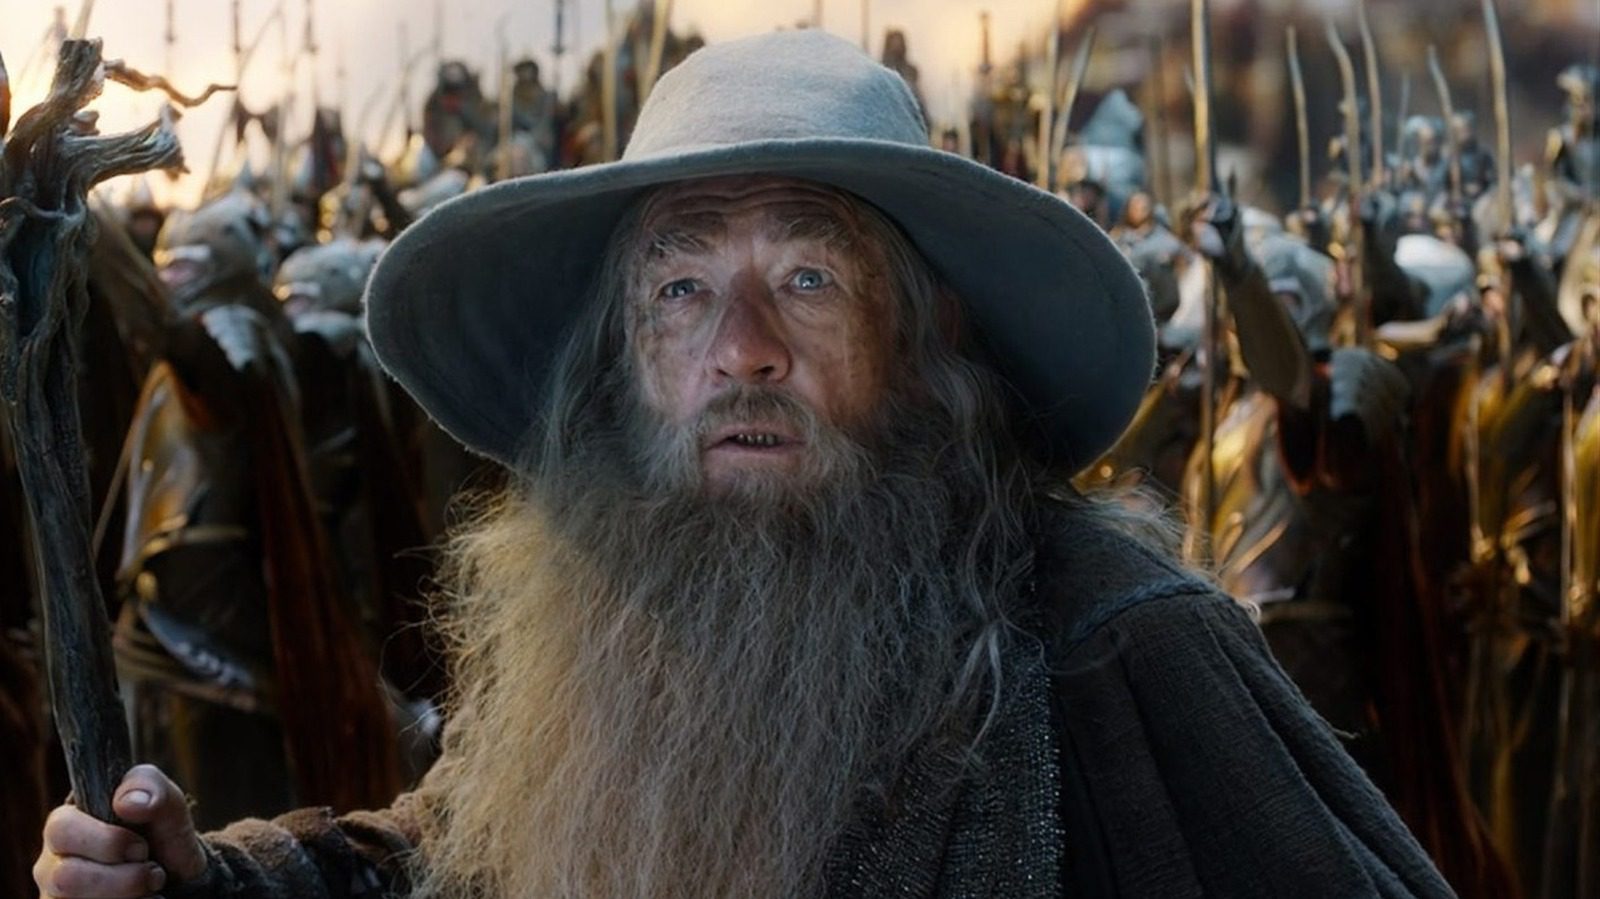 We Could Be Getting Middle-Earth Projects Beyond Warner Bros. And Amazon Studios